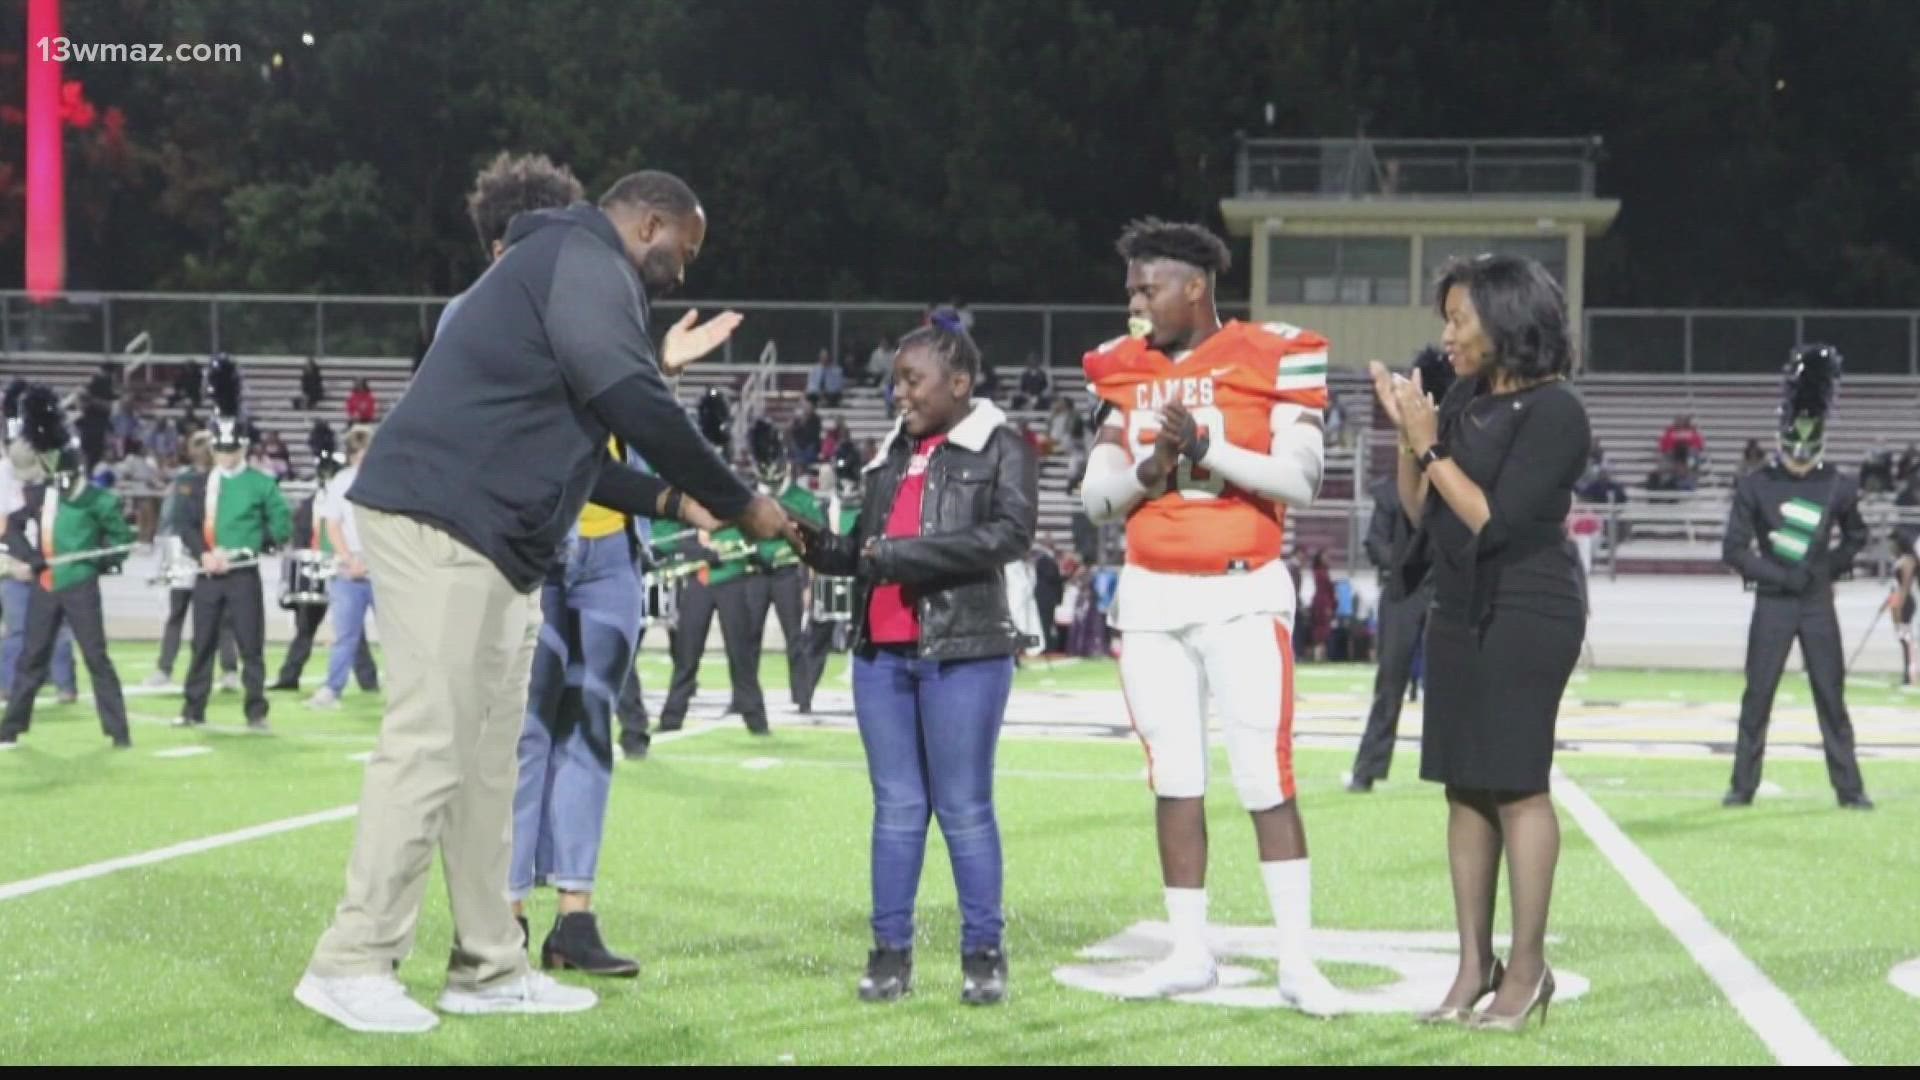 Ja'kayla Hardy was recognized on the field at halftime during the Rutland High School football game Thursday night. She earned the "Hurricane Hero" award.